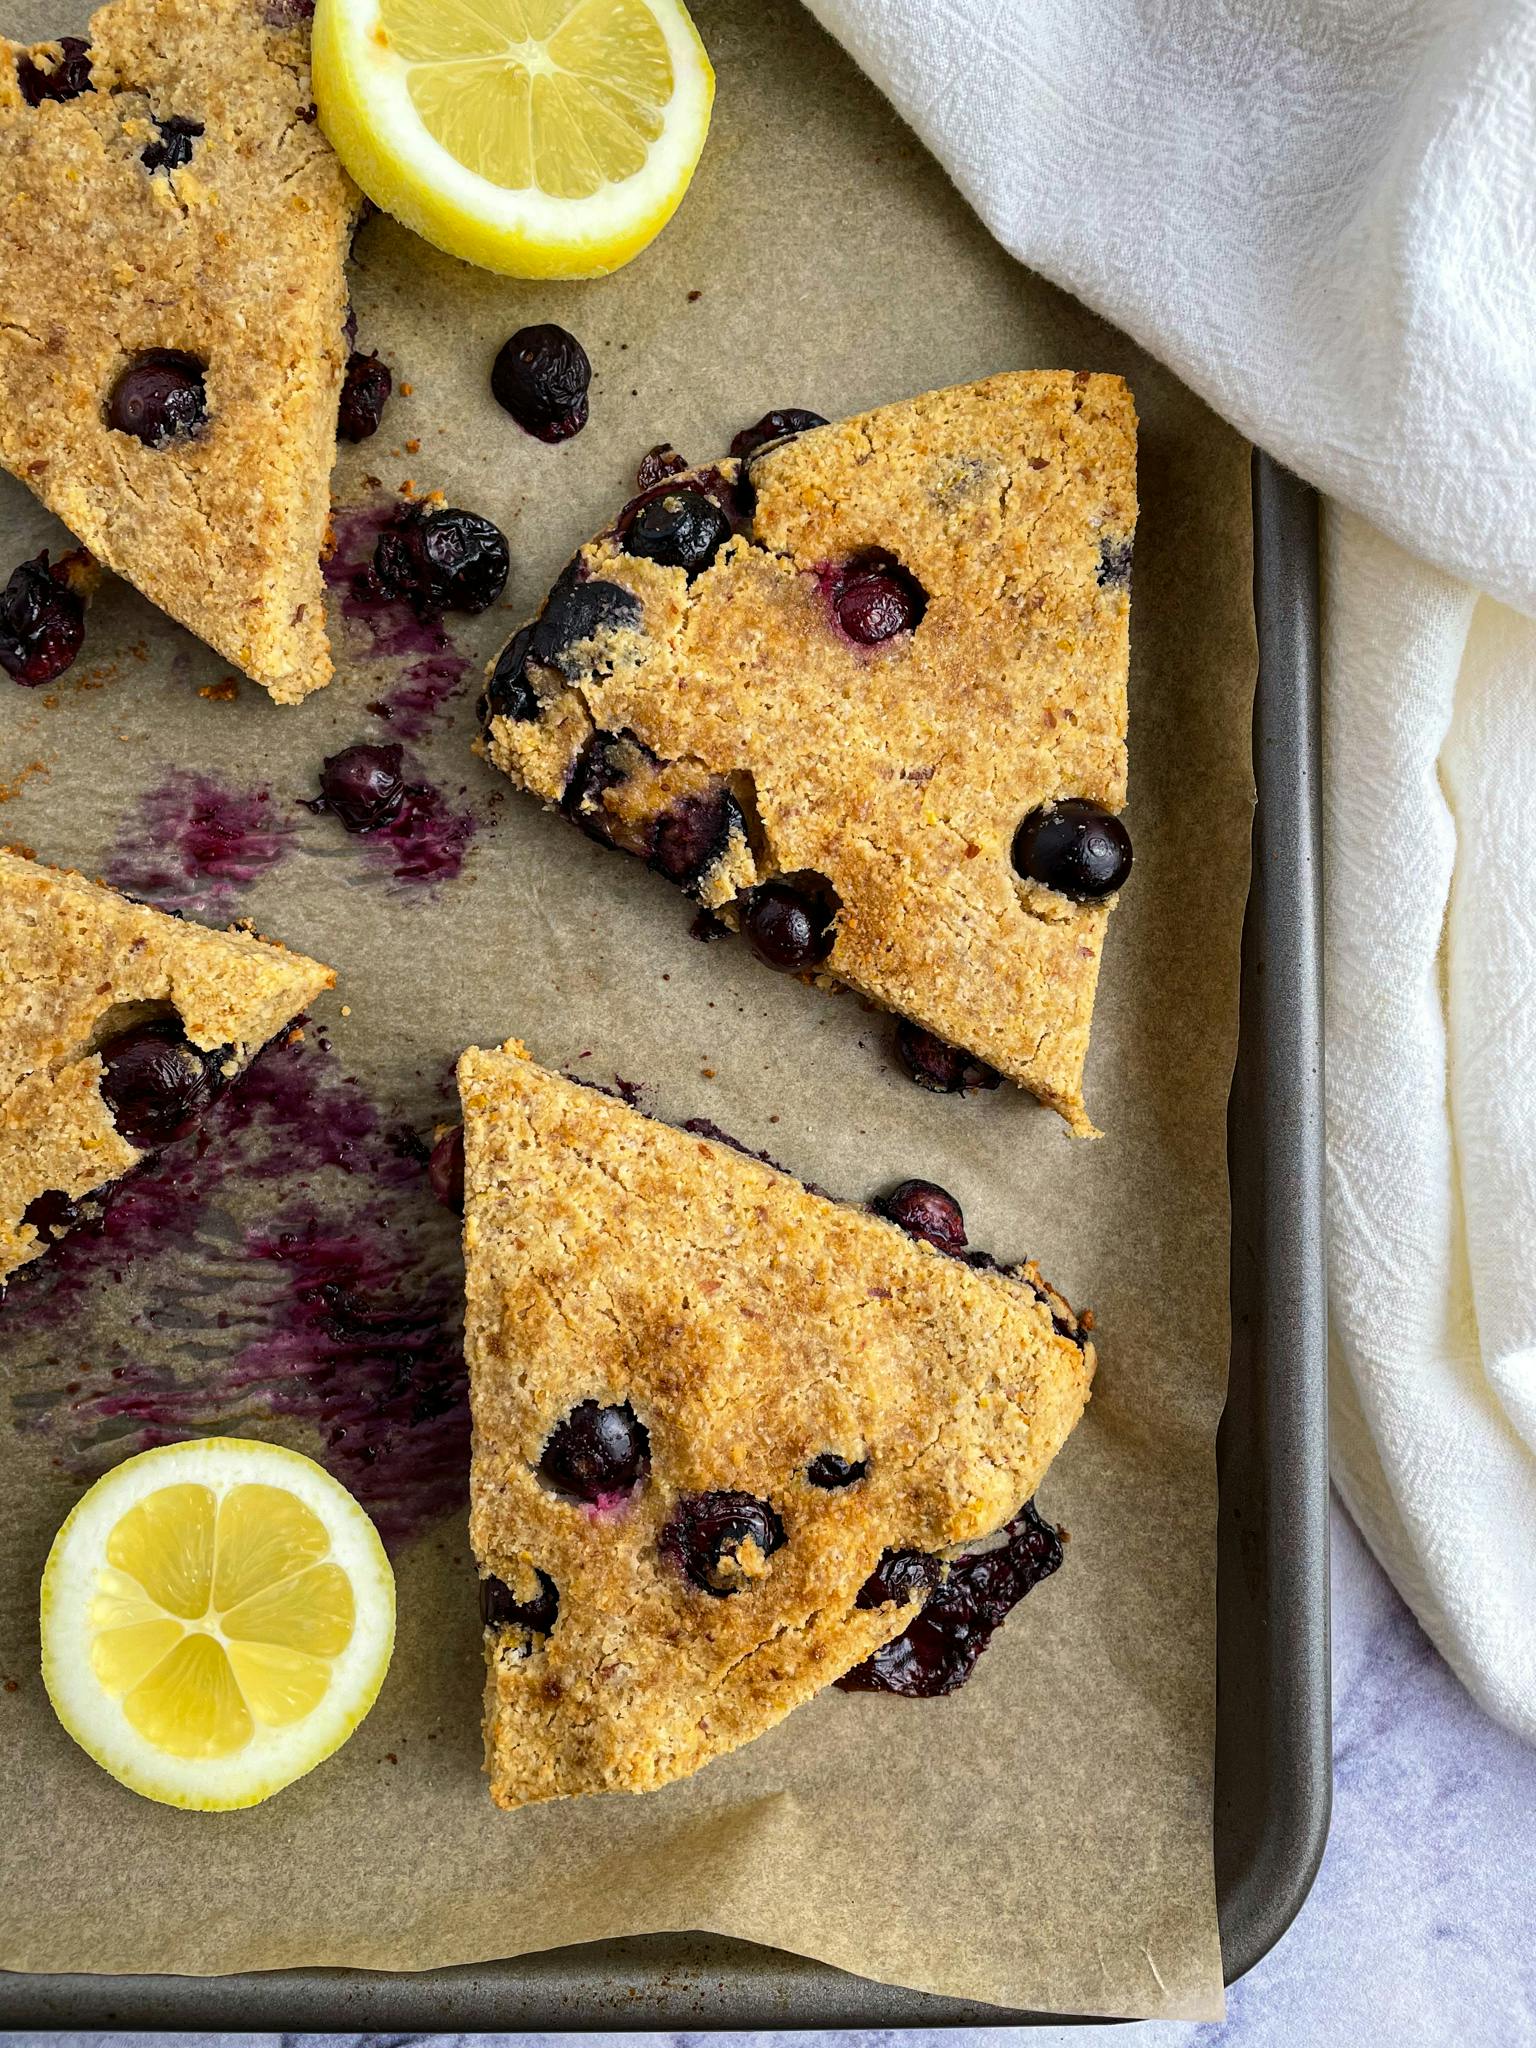 Gluten-free blueberry lemon scones spread out on a baking sheet with slices of lemon around them.